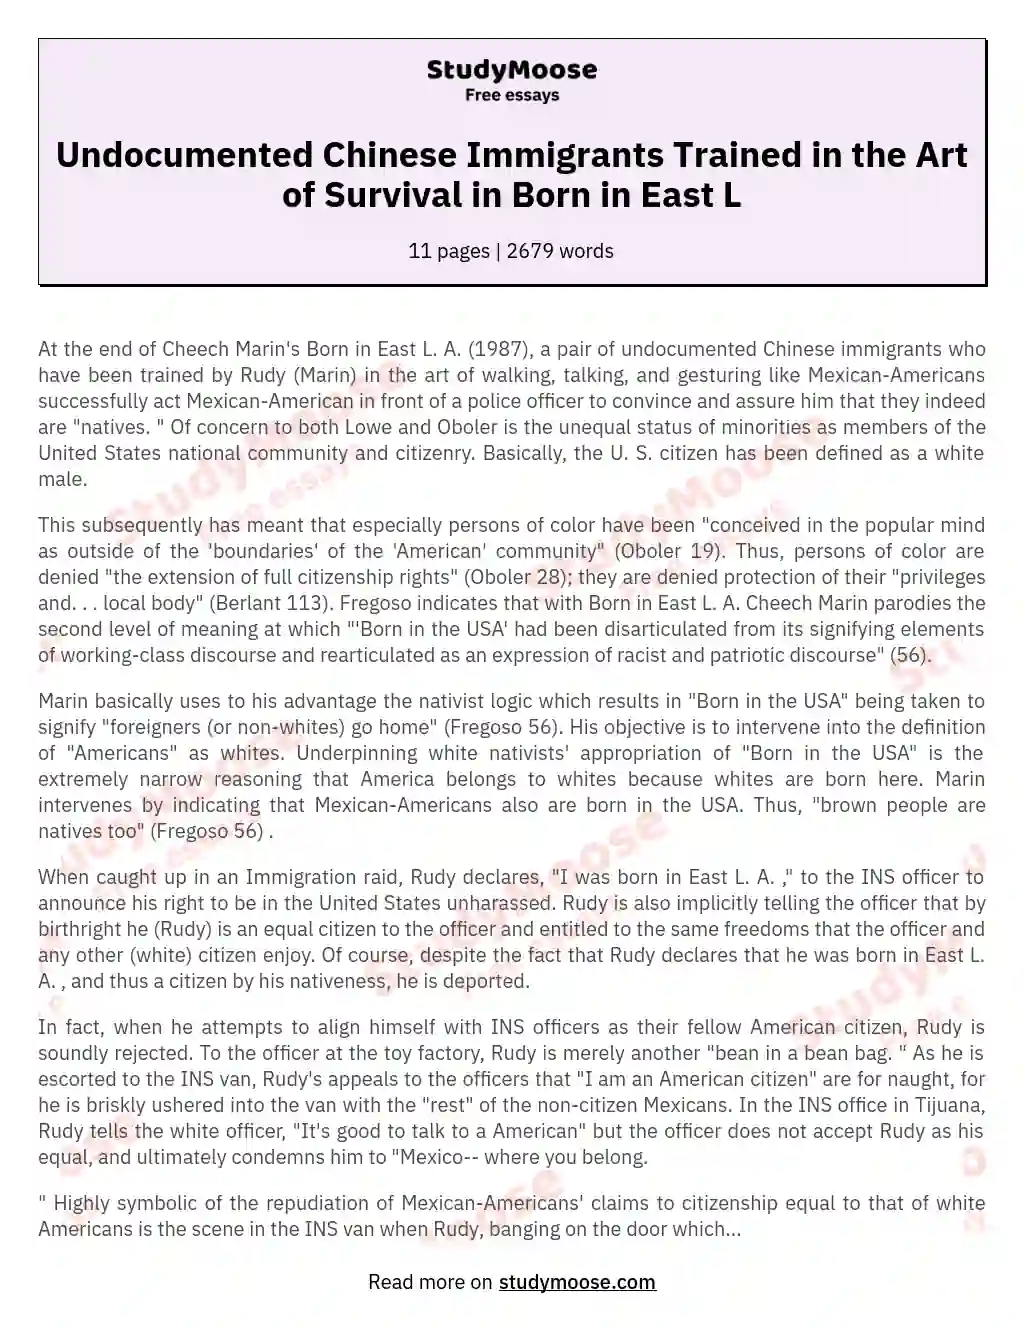 Undocumented Chinese Immigrants Trained in the Art of Survival in Born in East L essay